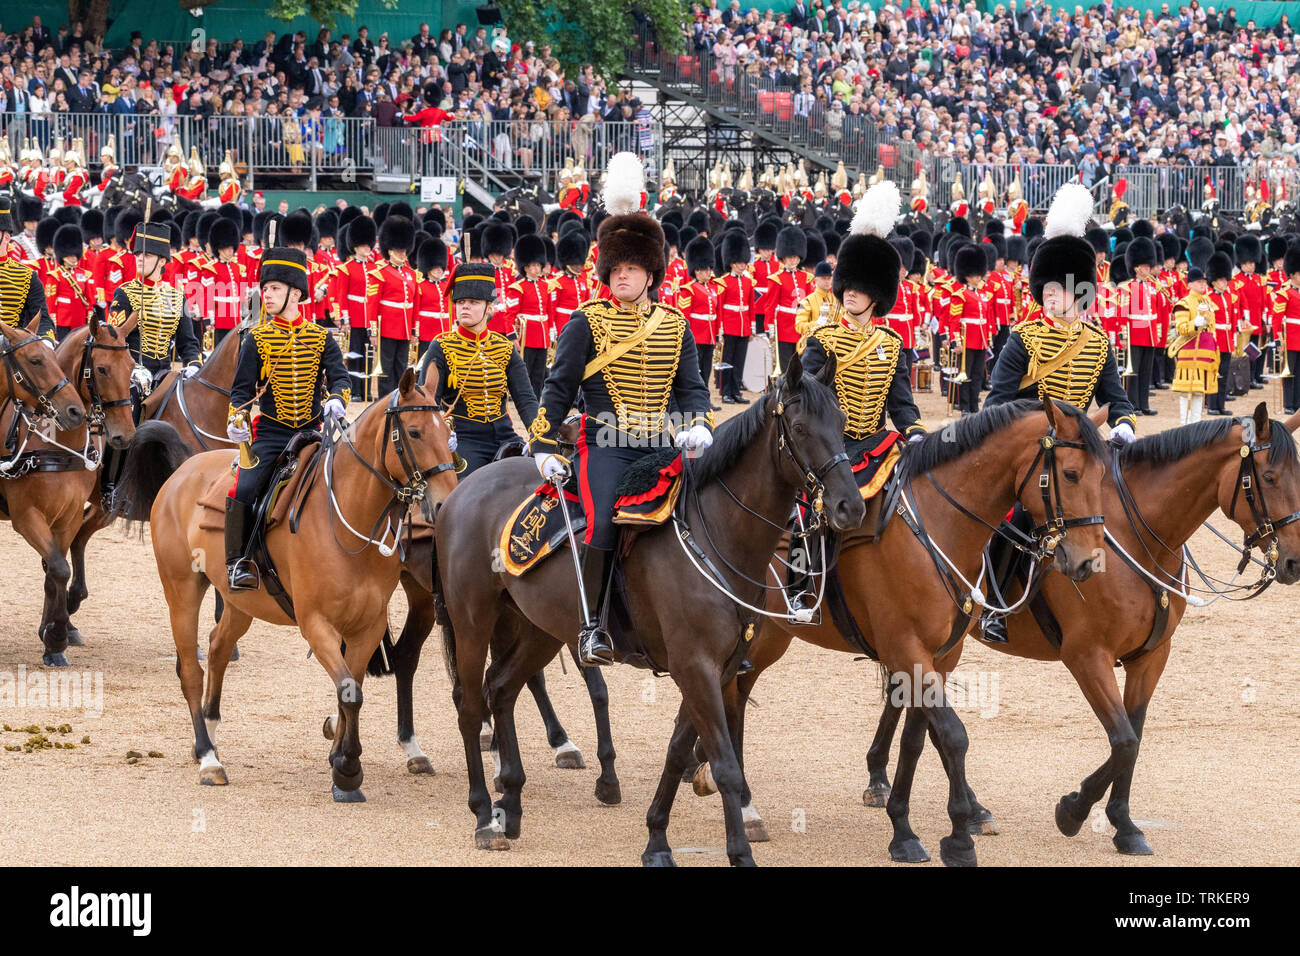 London, UK. 8th June 2019 Trooping the Colour 2019, The Queen's Birthday parade on Horseguards Parade London in the presence of Her Majesty The Queen.  Colour trooped by the 1st Battalion Grenadier Guards  Royal Horse Artillery Credit Ian Davidson/Alamy Live News Stock Photo